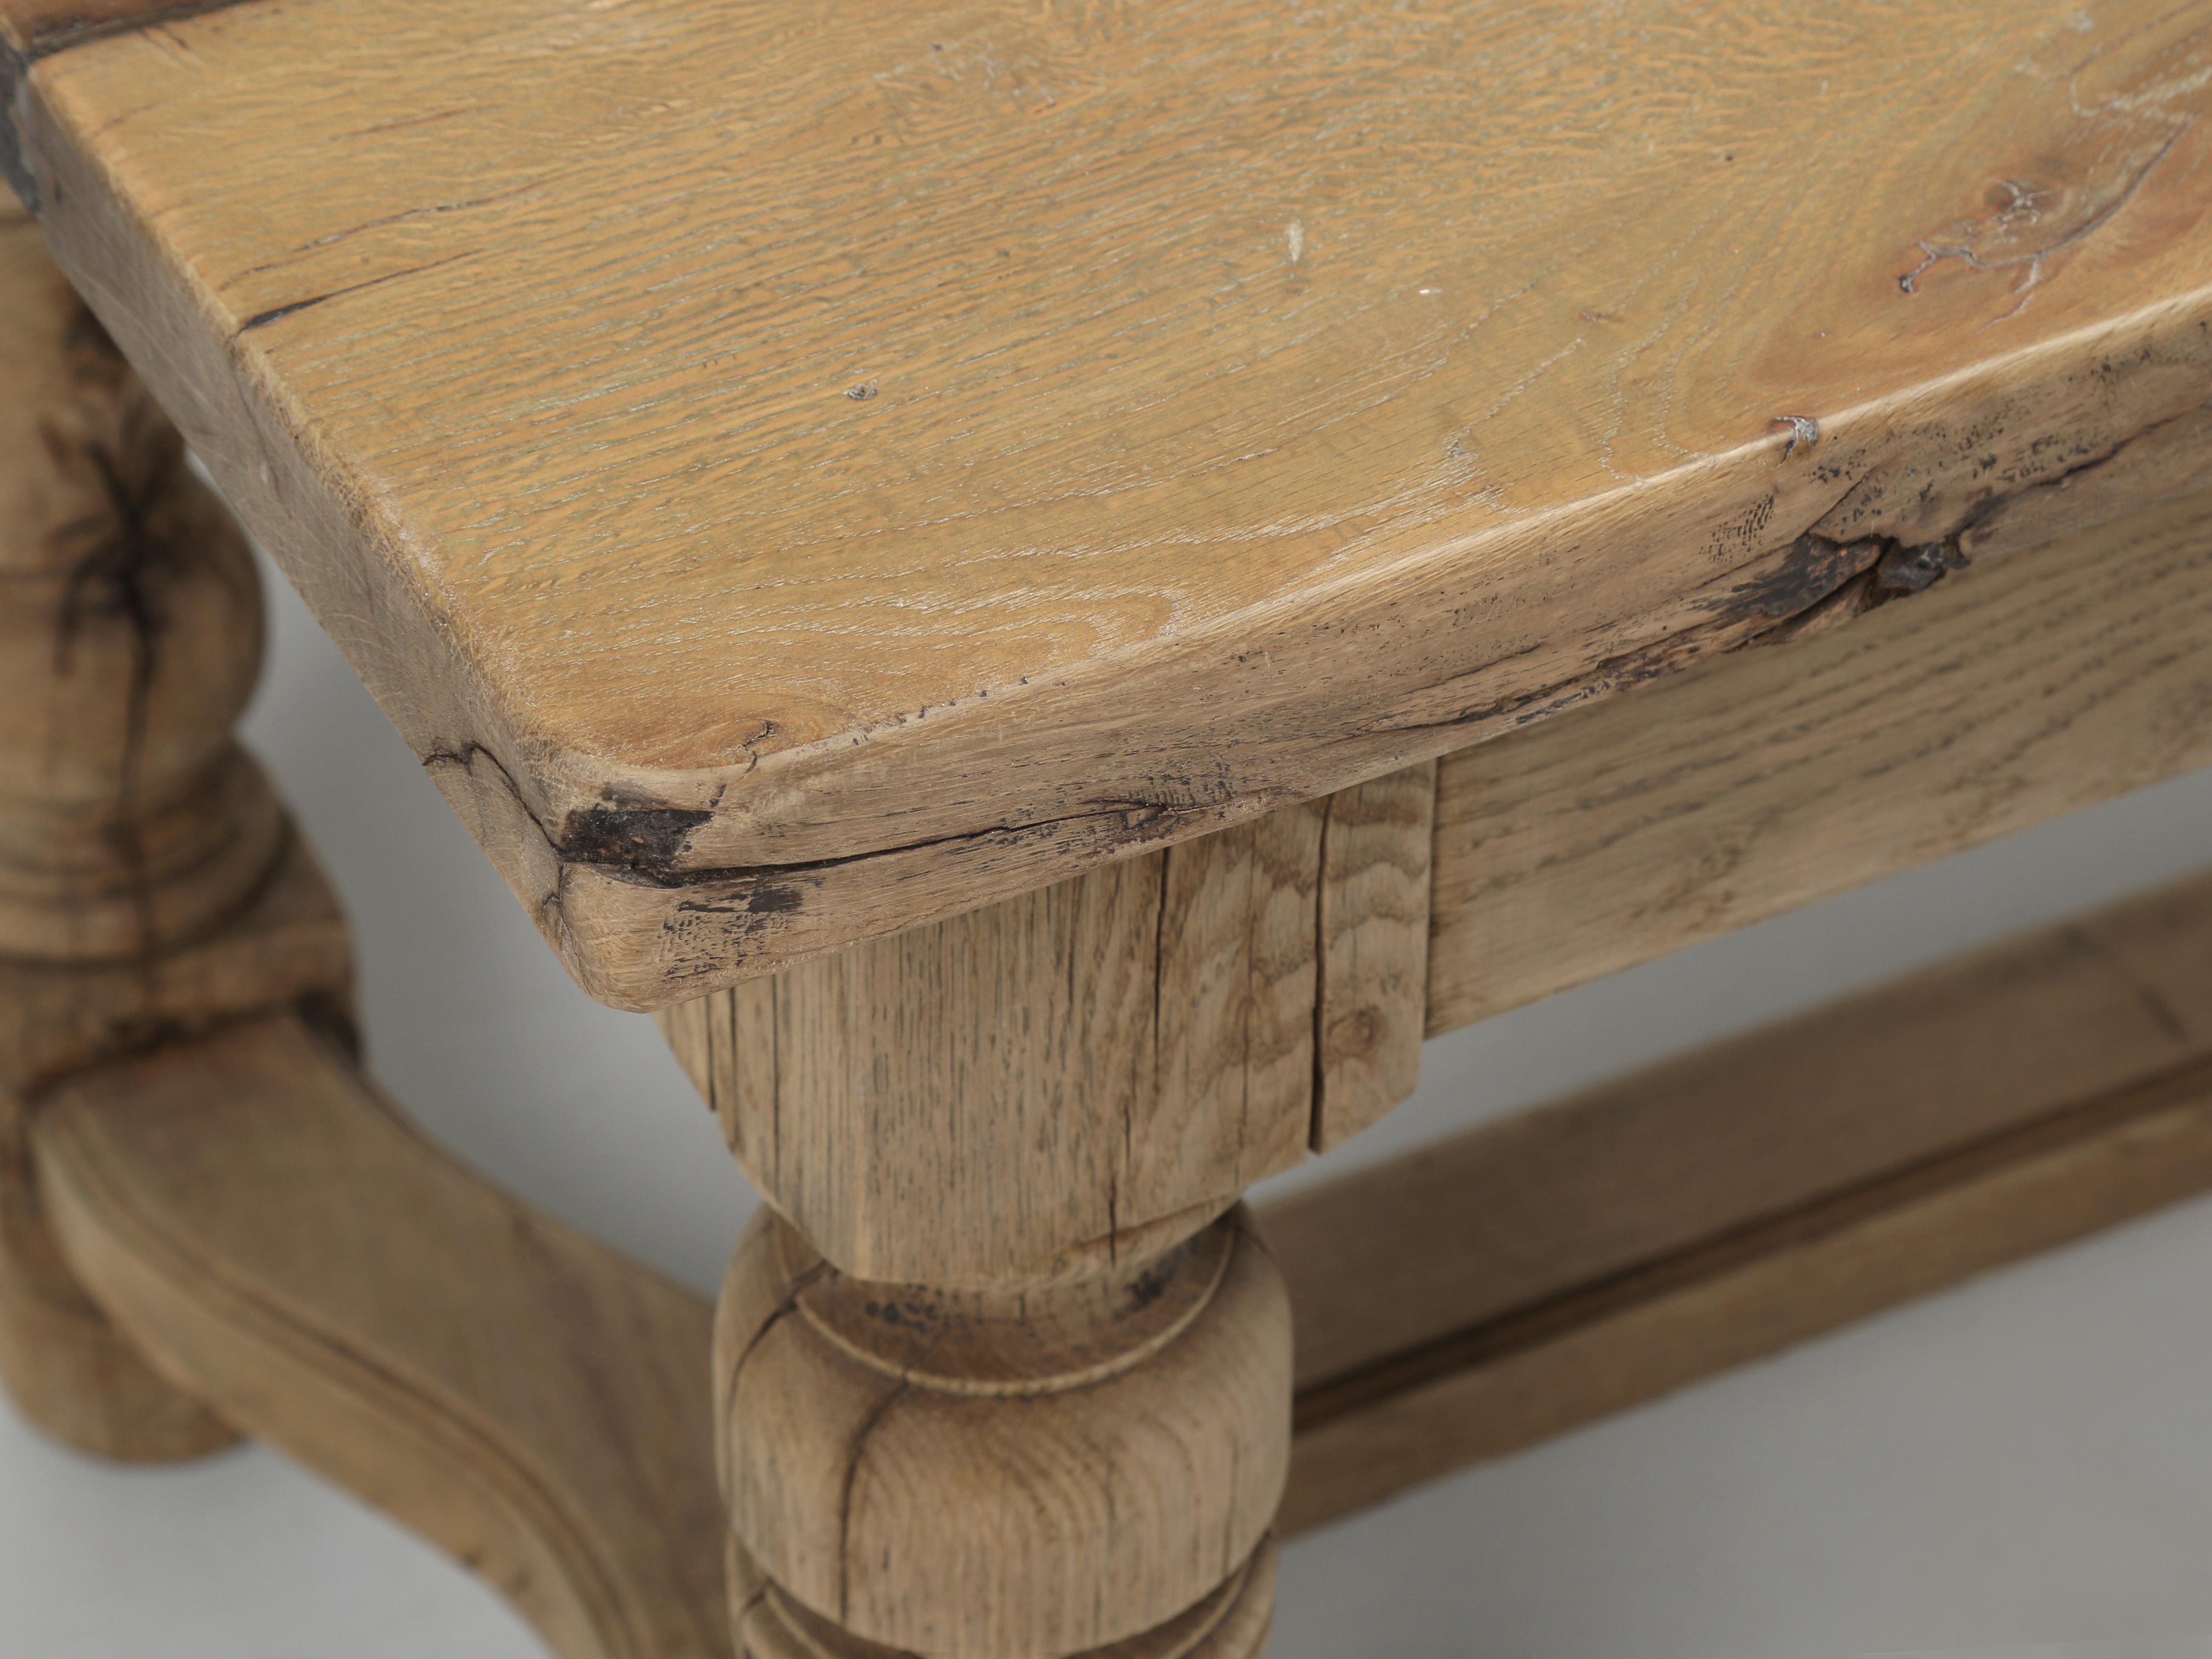 Late 19th Century Antique Irish Dining Table or Kitchen Table Finished in Natural White Oak 1800's